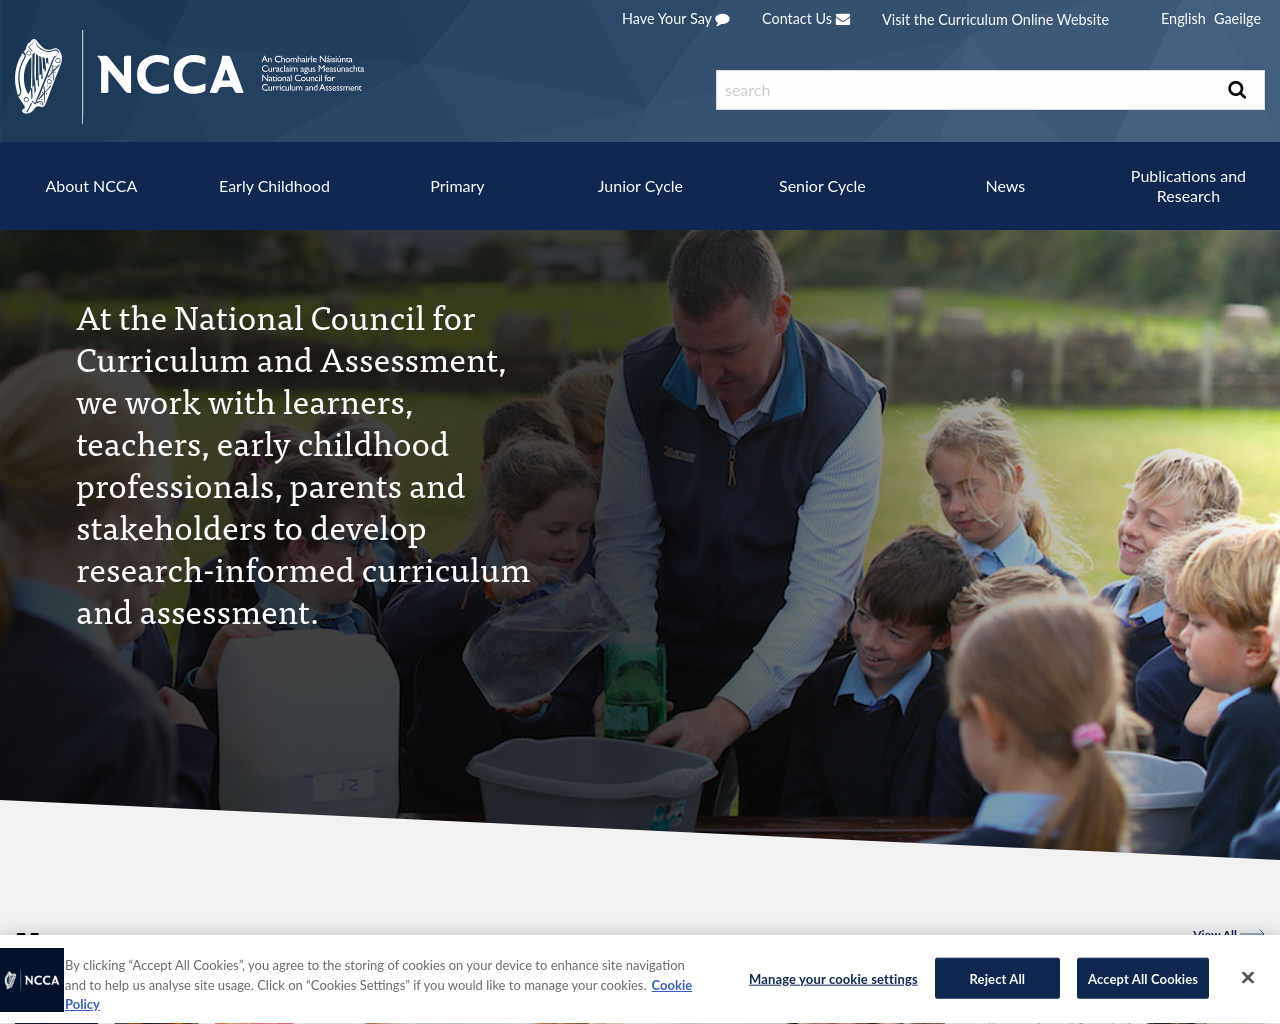 For information on the National Curriculum for primary schools